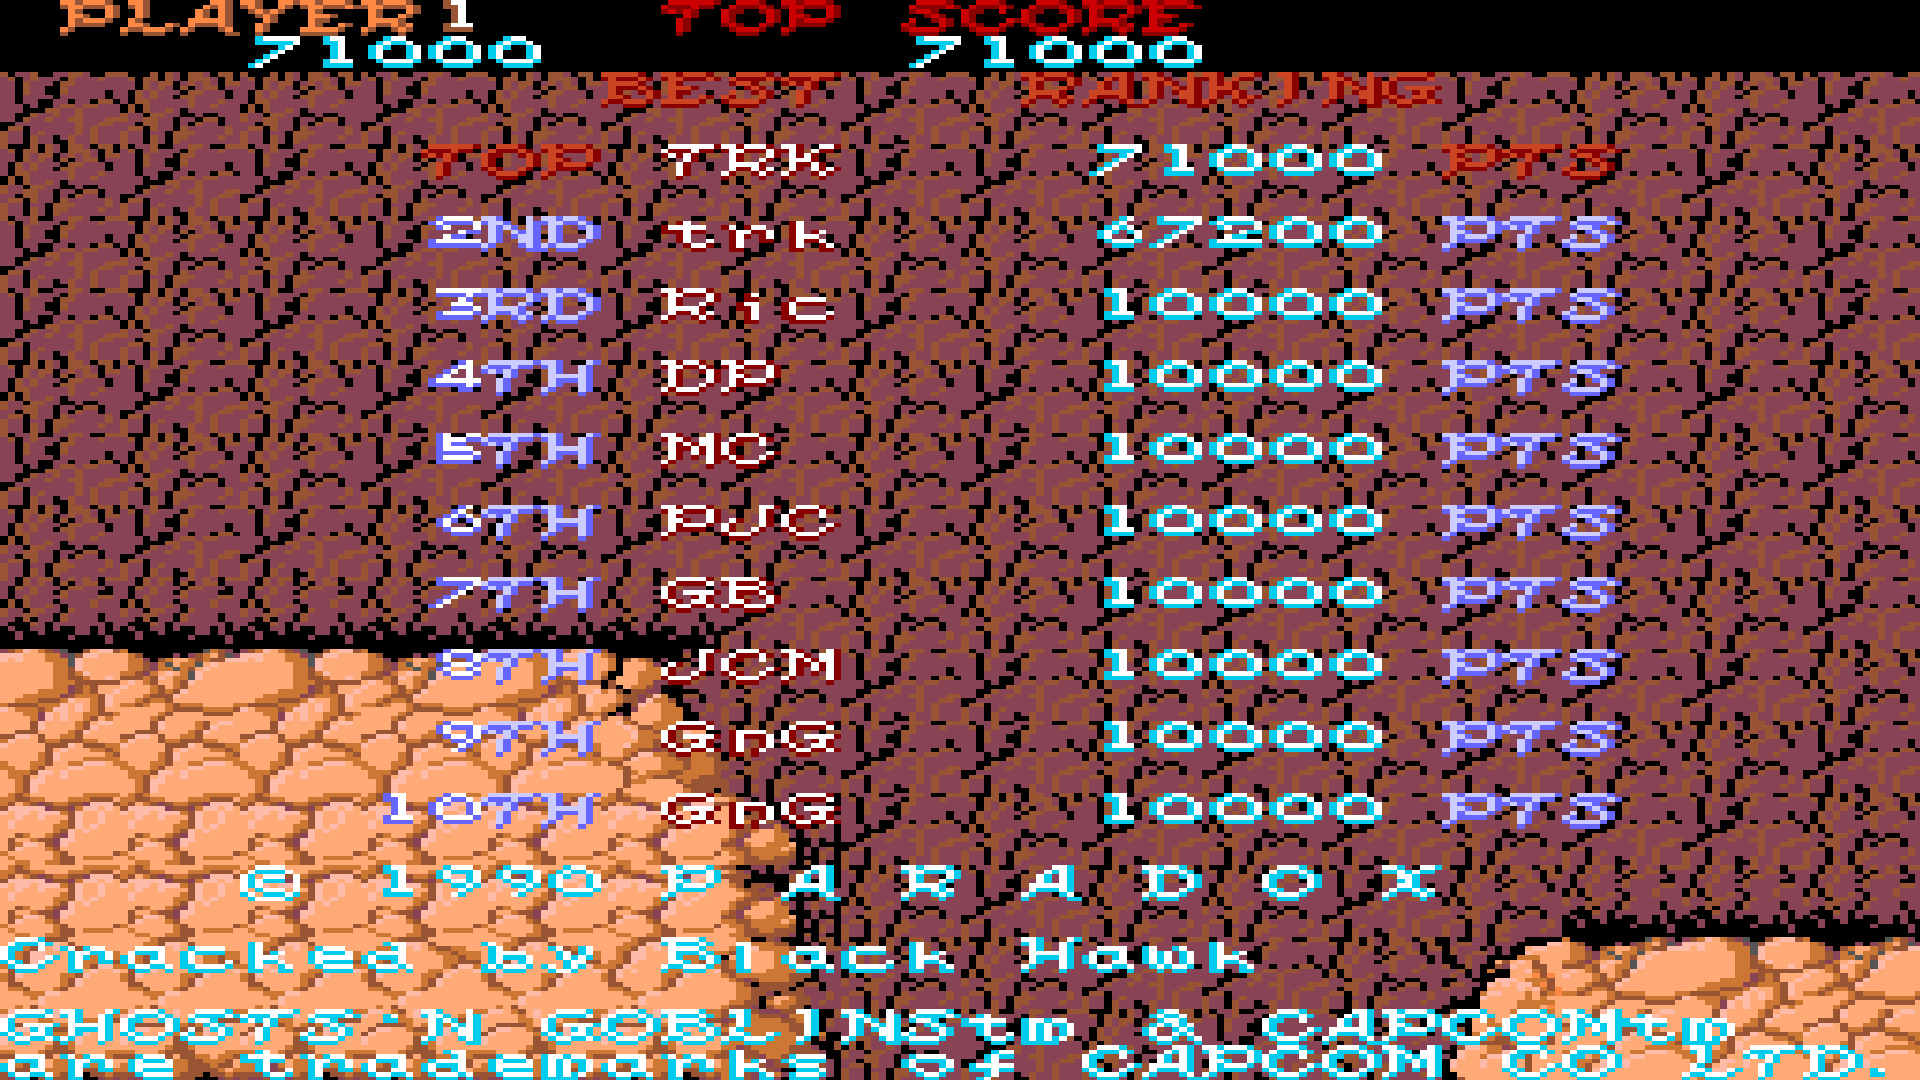 TheTrickster: Ghosts N Goblins (Amiga Emulated) 71,000 points on 2015-07-27 07:29:51